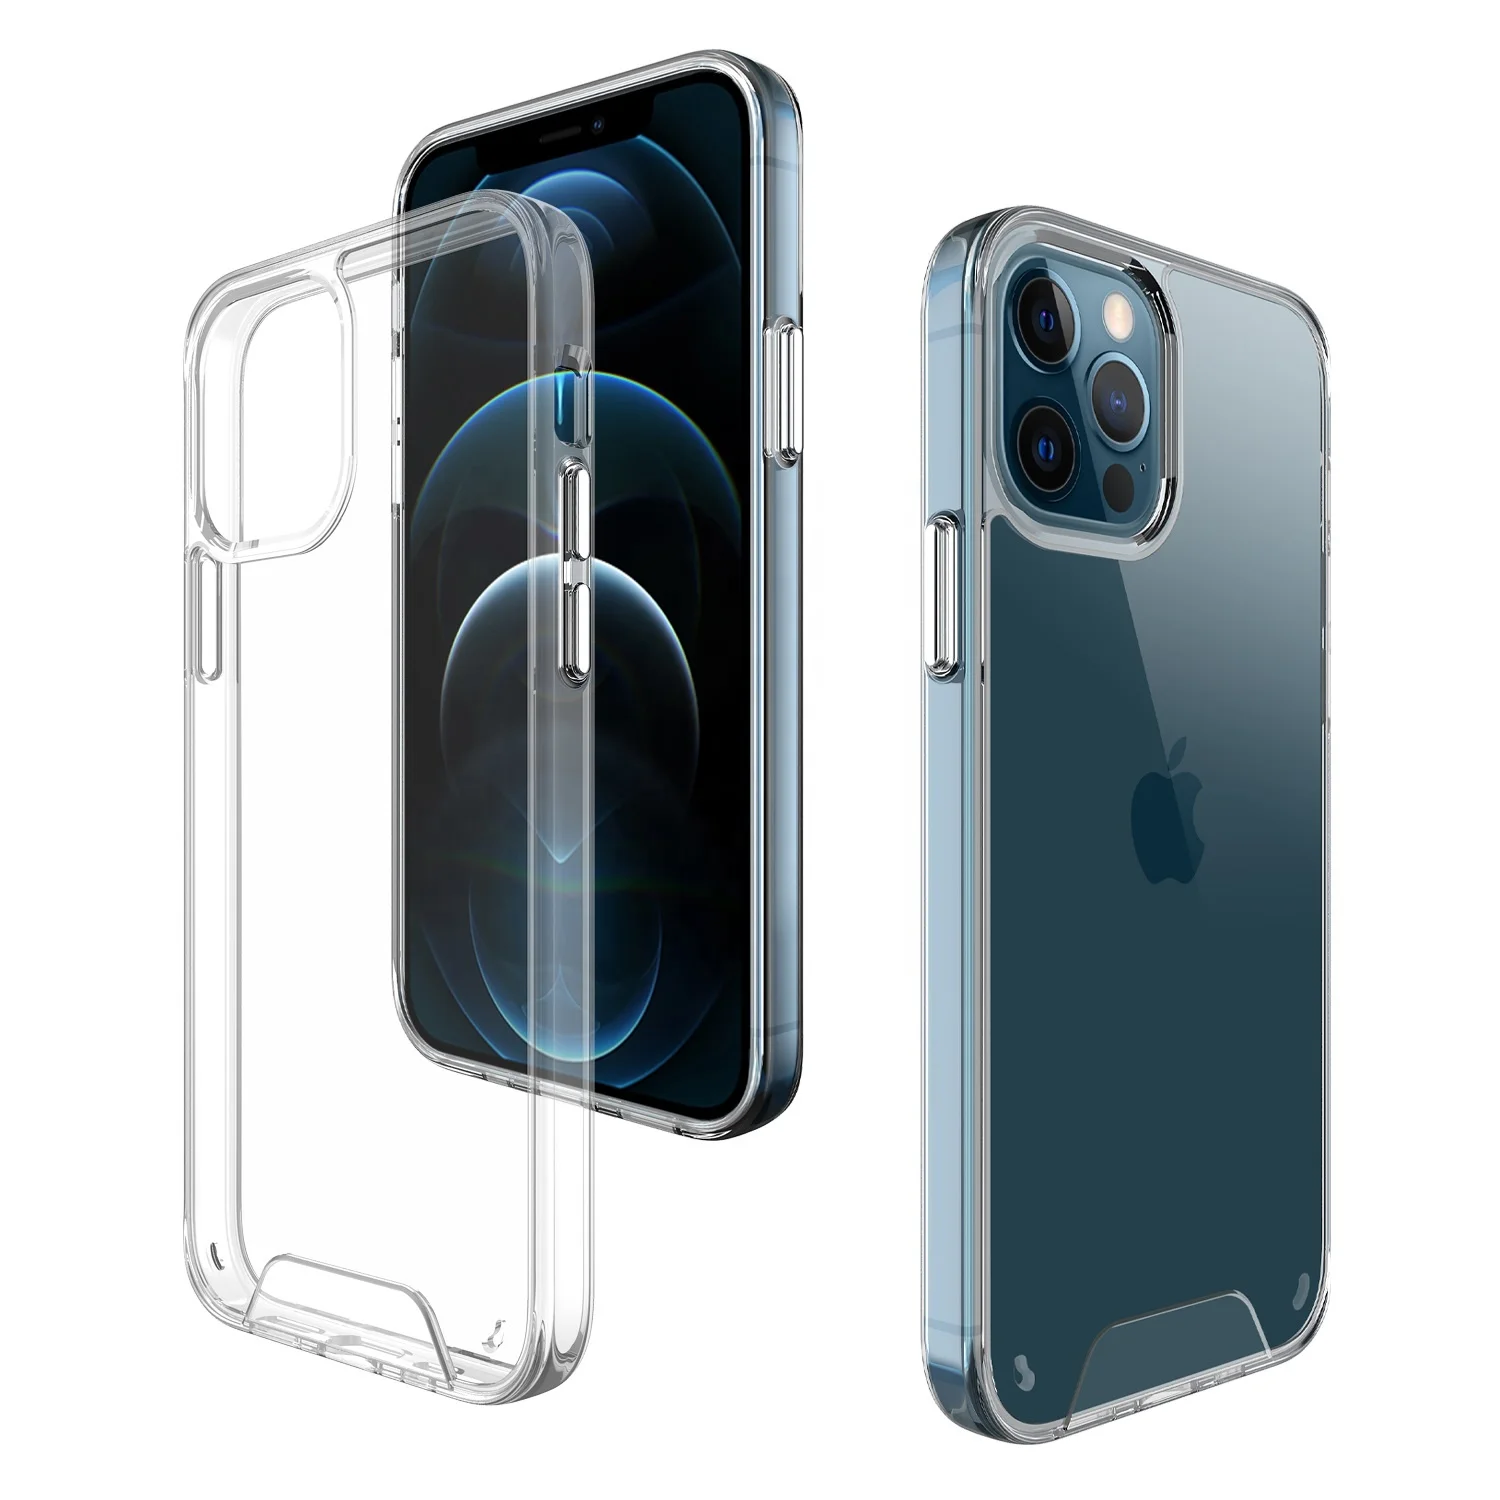 Wholesale Phone Case Supplier Space Mobile Accessories TPU PC Cover Para Celular for Apple iPhone 12 Pro Max 11 XS XR X mini 8 Plus From m.alibaba.com